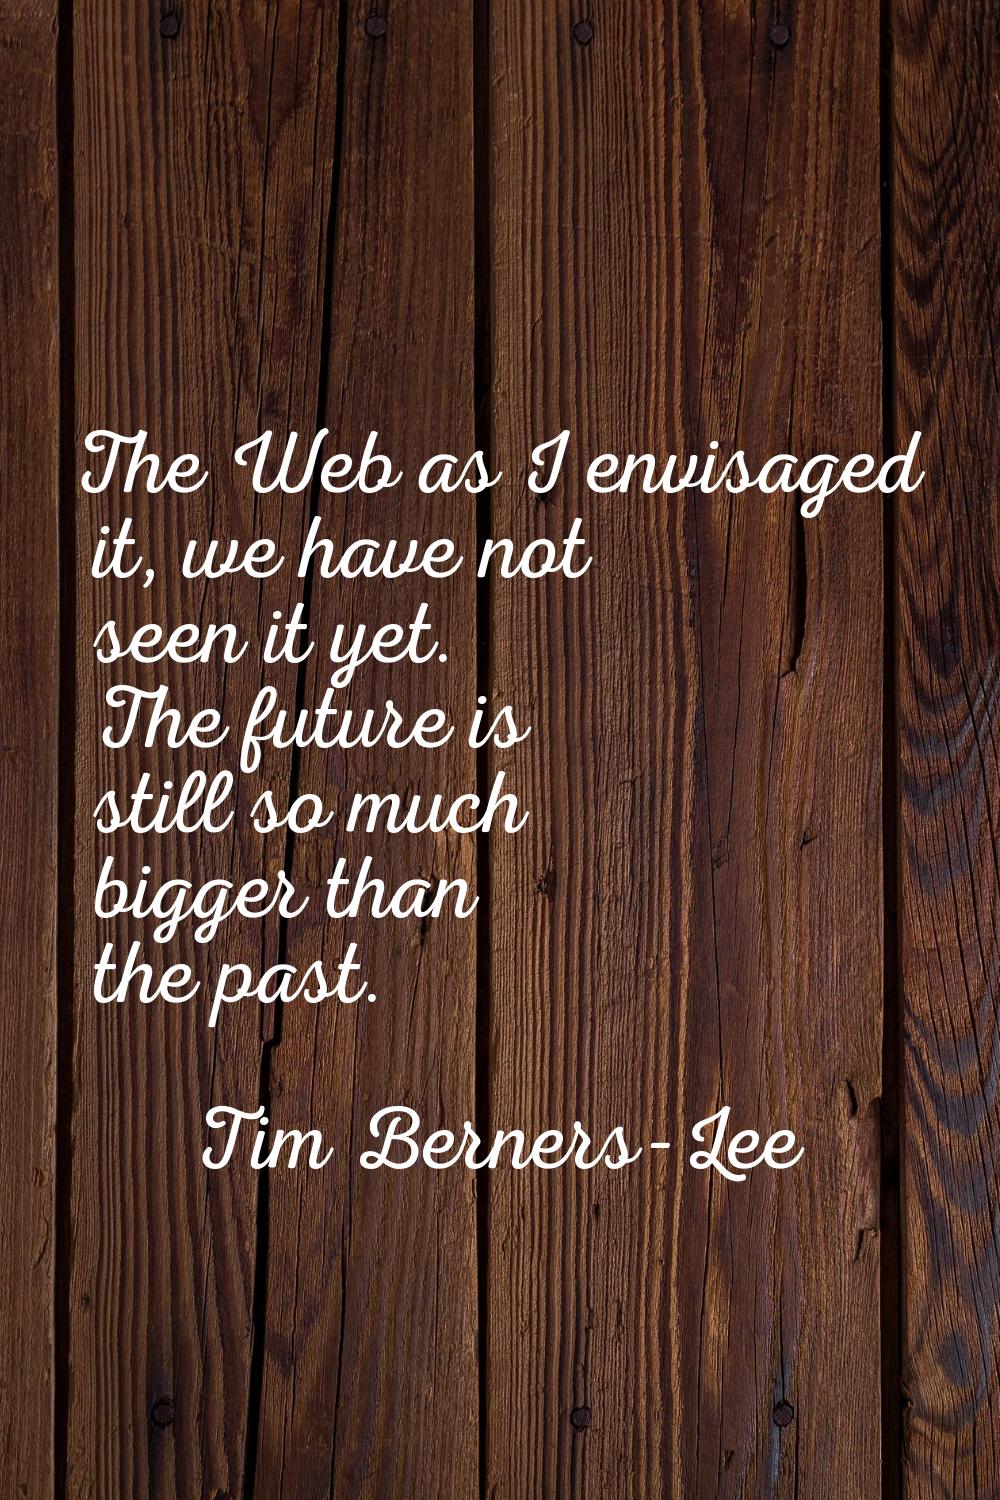 The Web as I envisaged it, we have not seen it yet. The future is still so much bigger than the pas